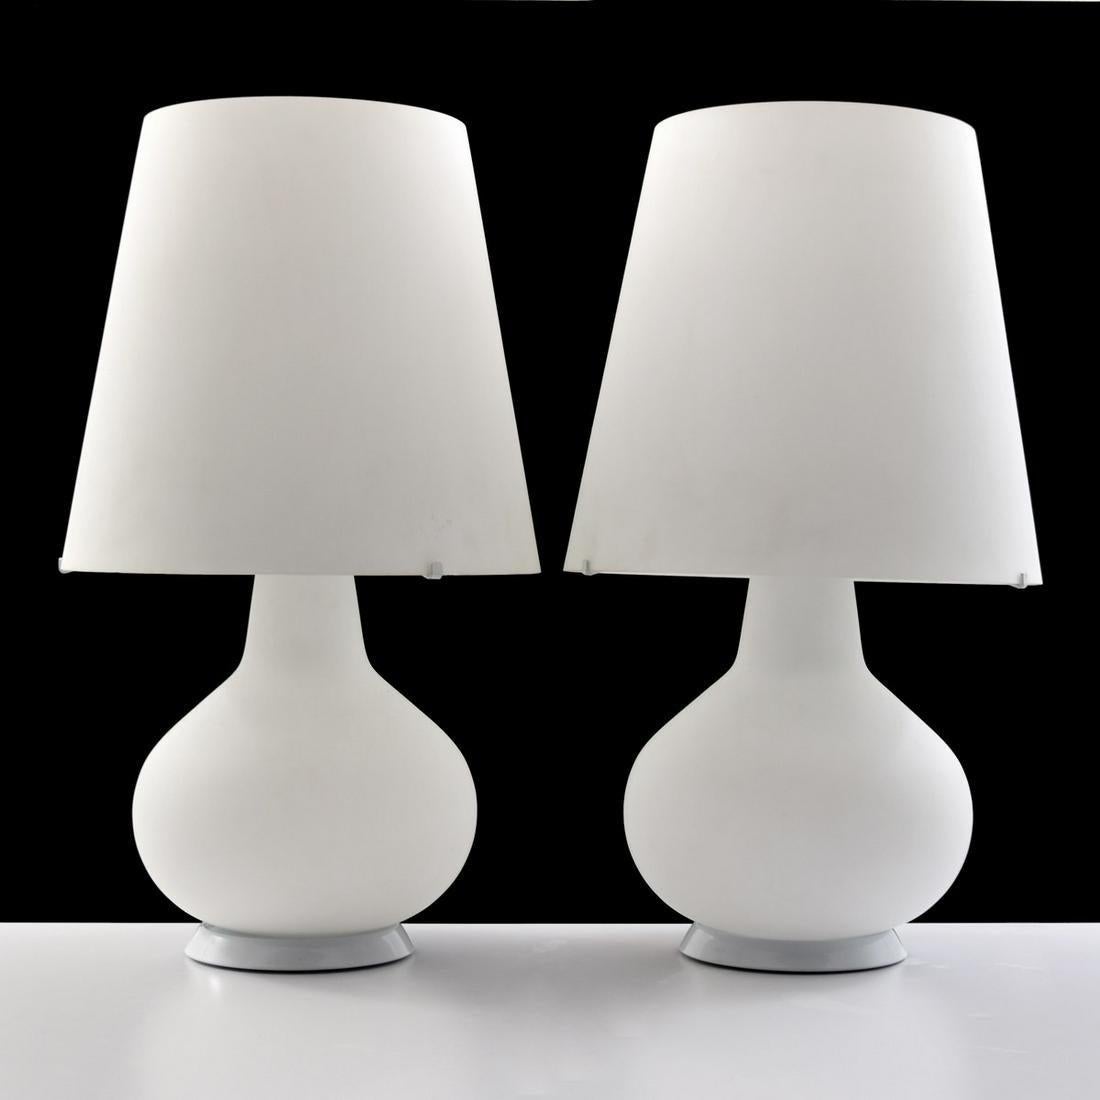 Gorgeous pair of white glass lamps with glass shades. Designed by Max Ingrand for Fontana Arte.